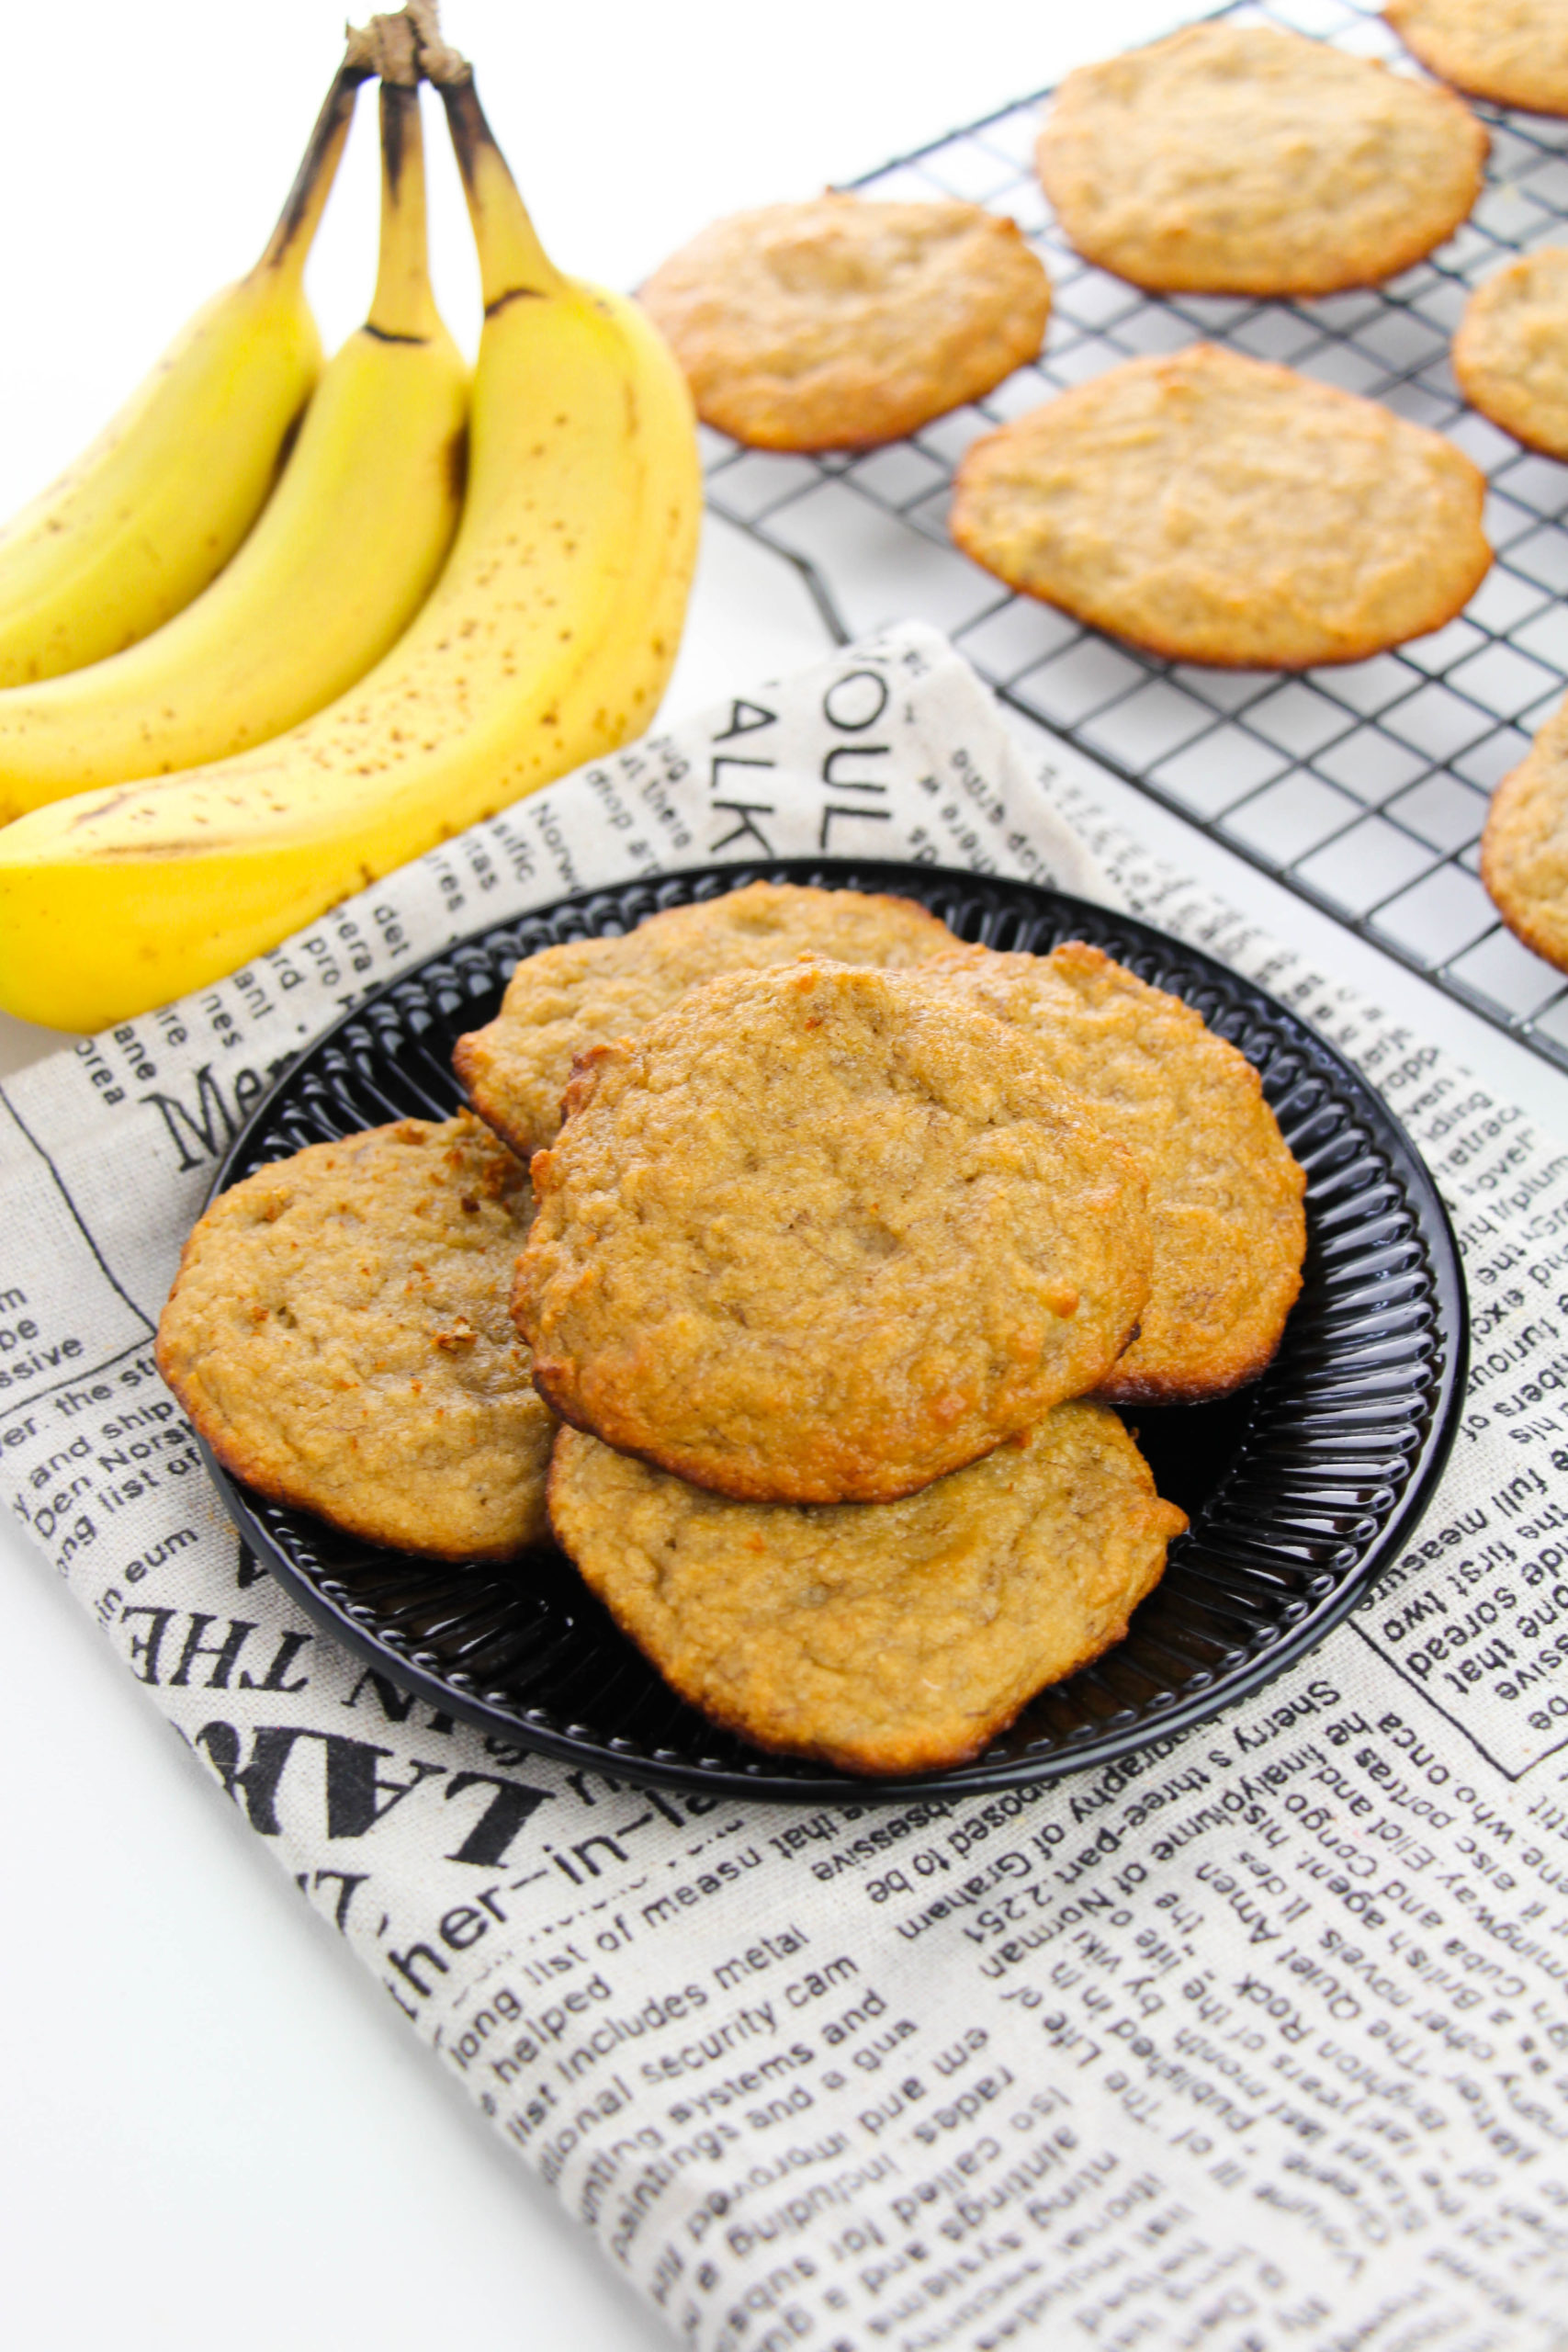 A stack of five banana bread cookies on a plate wih a bunch of bananas on the side.